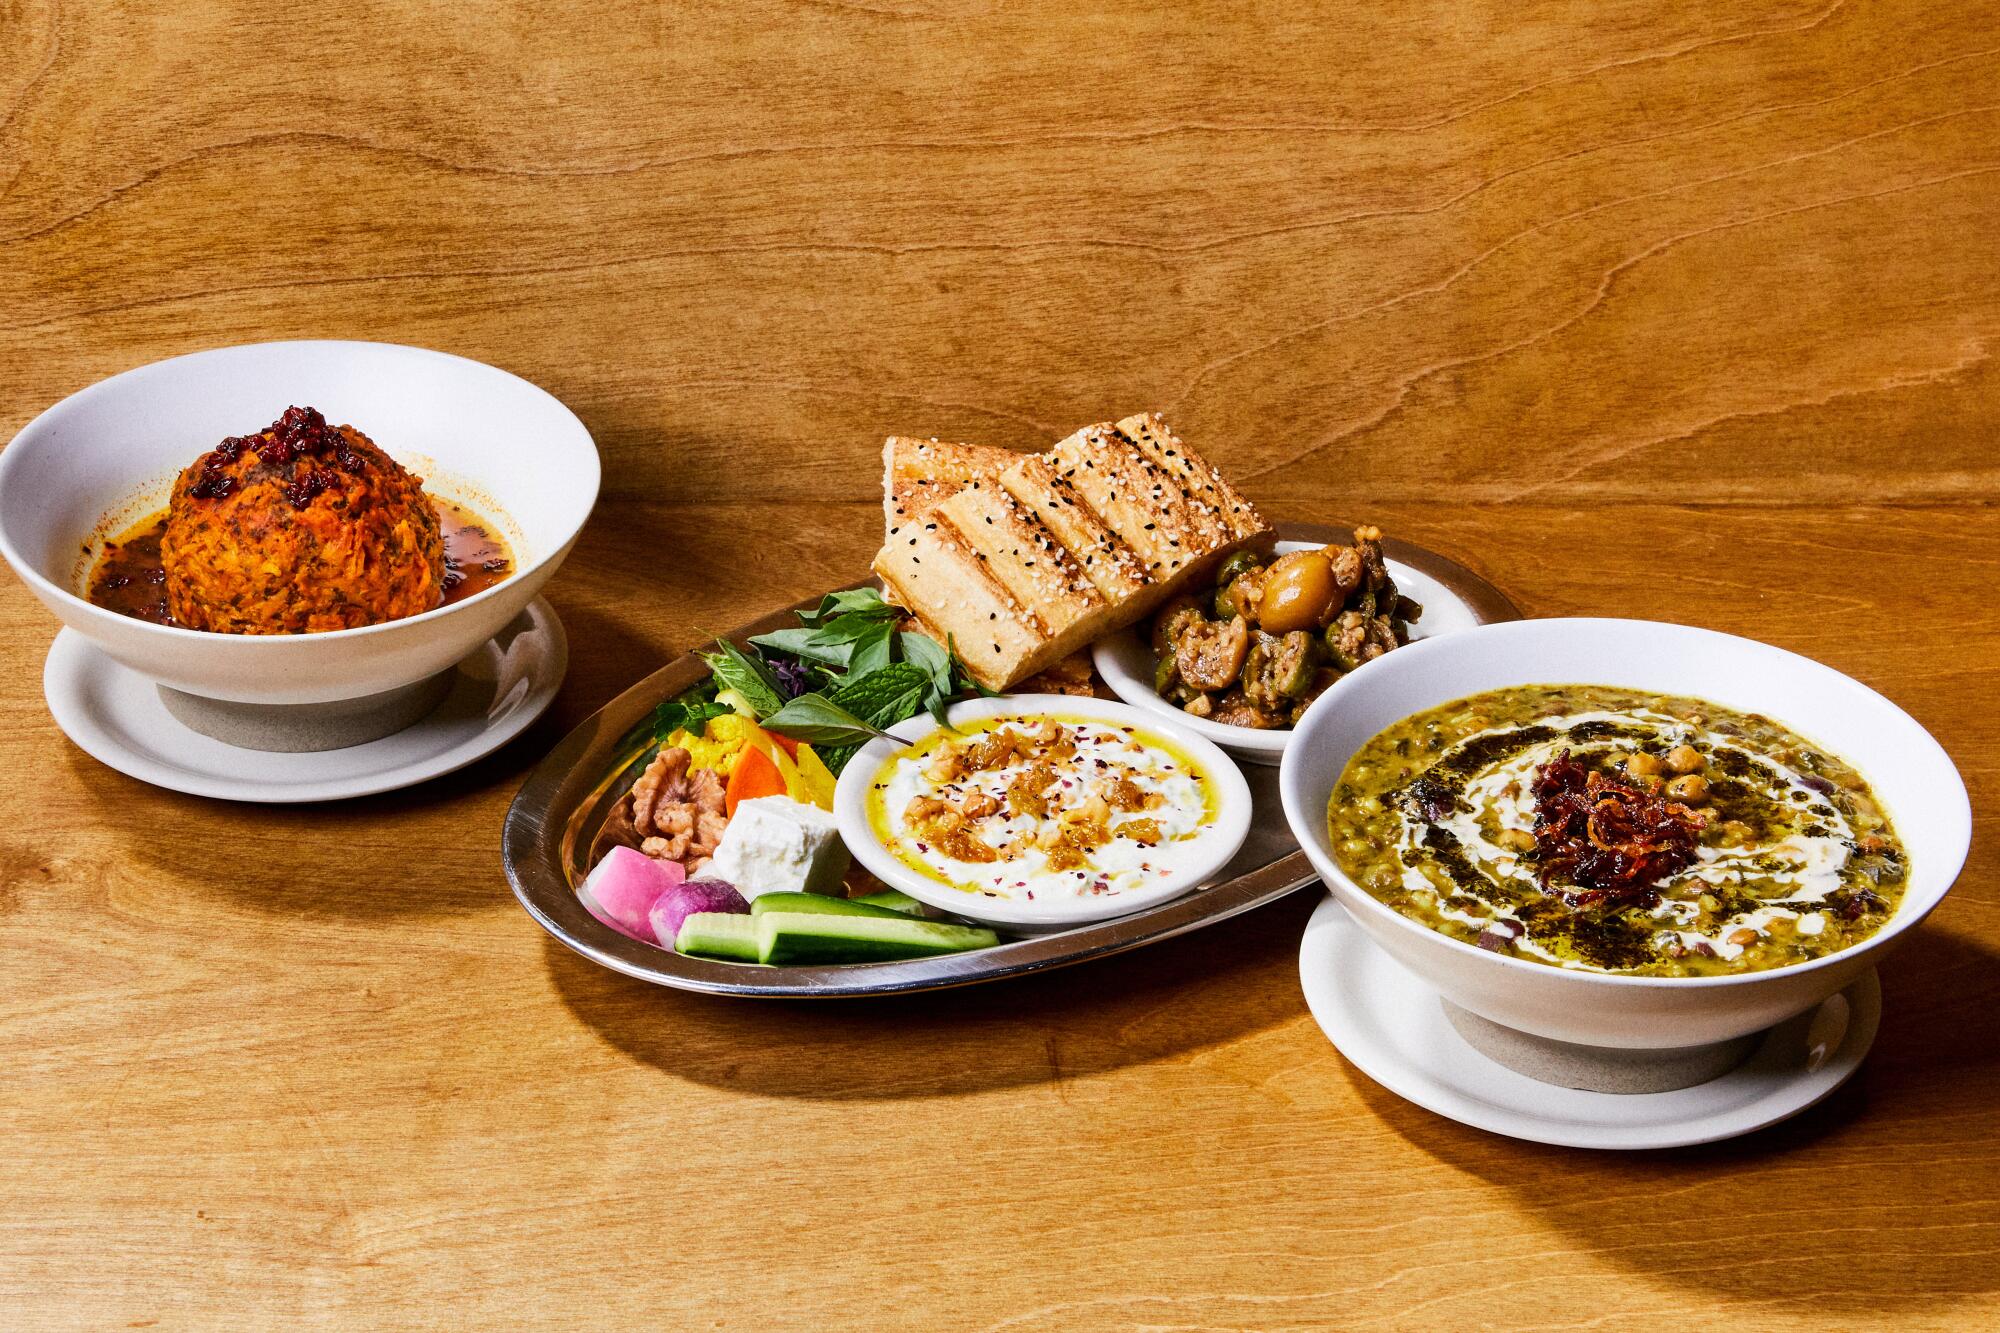 A few dishes from the Persian Restaurant Azizam in Silver Lake.